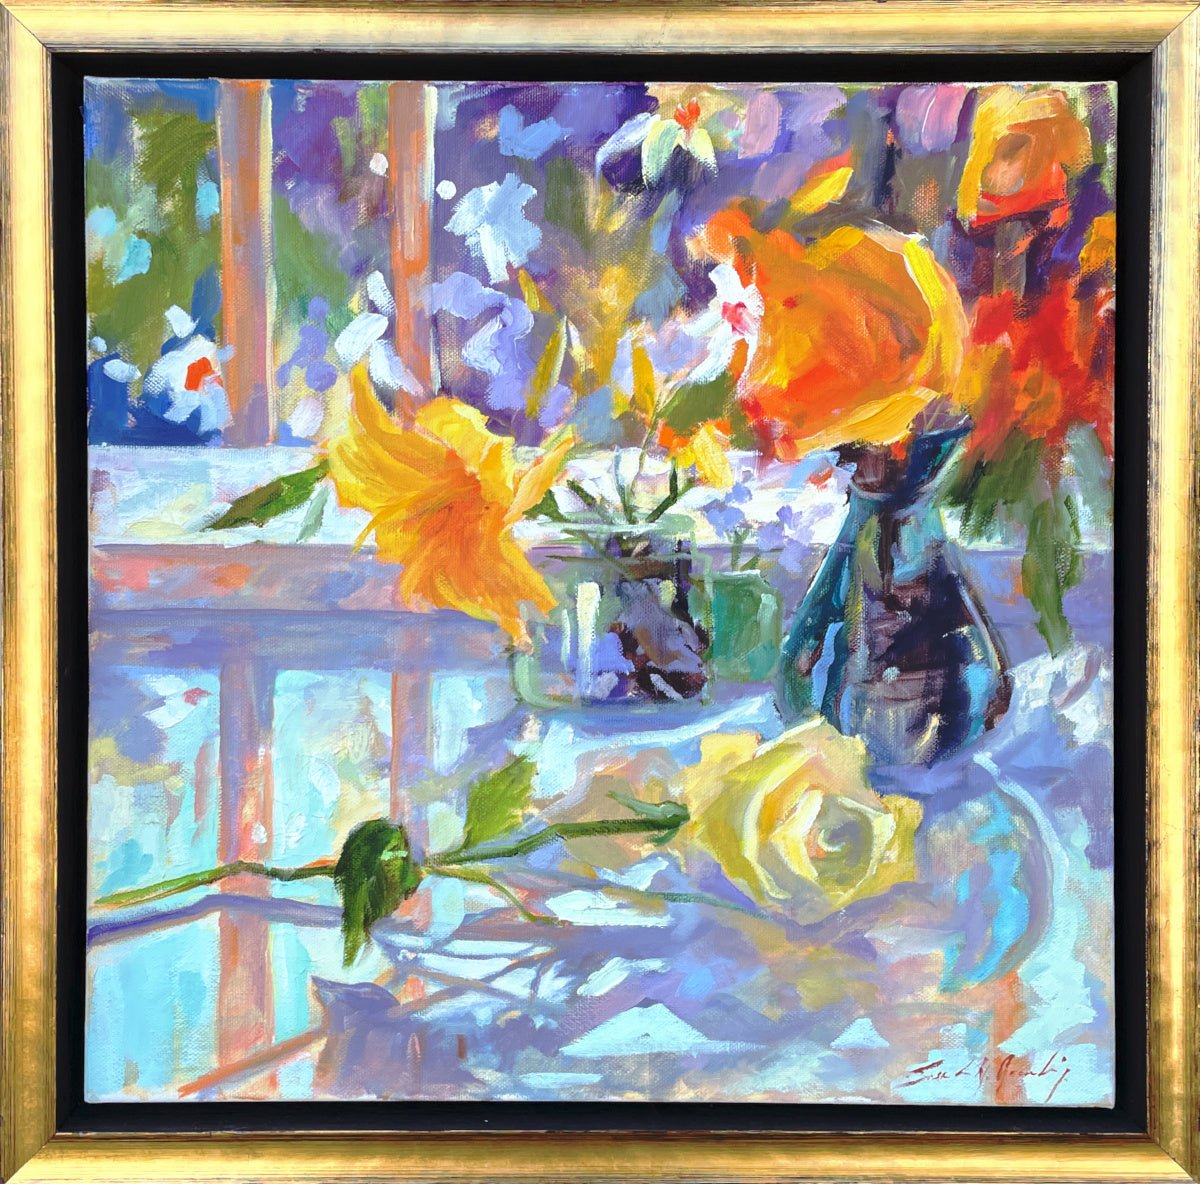 Morning Flowers by Susannah Gramling at LePrince Galleries